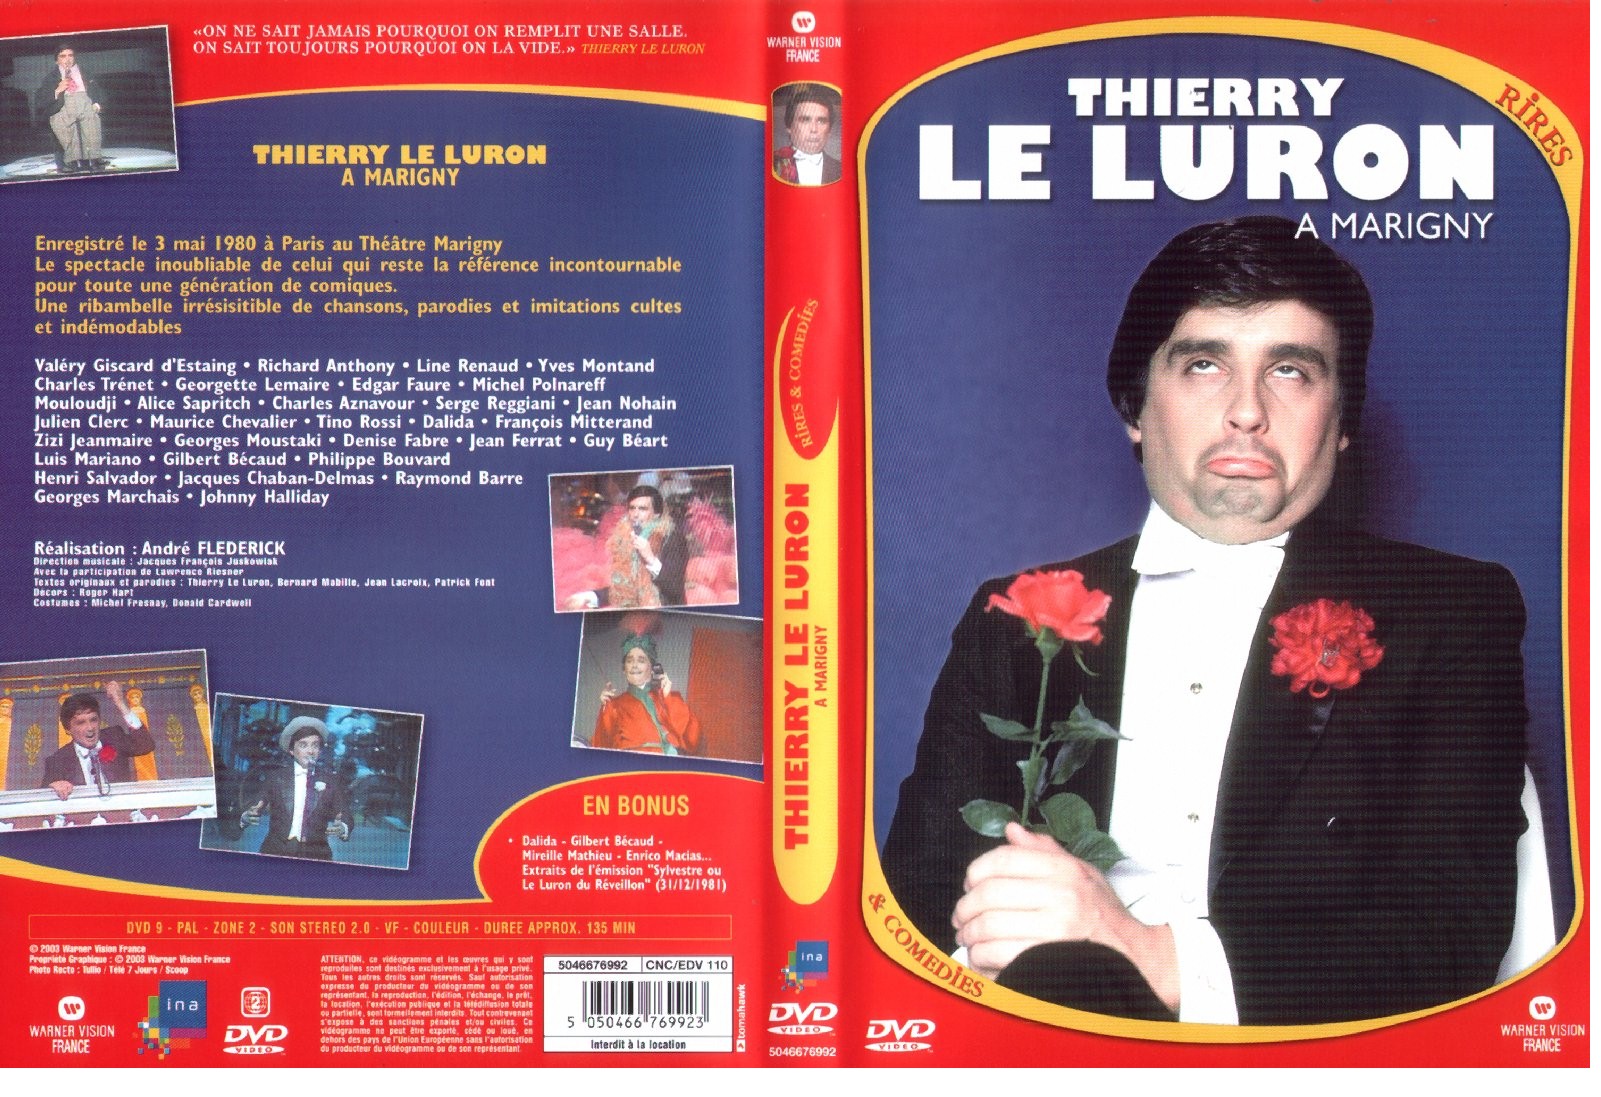 Jaquette DVD Thierry Le Luron  Marigny